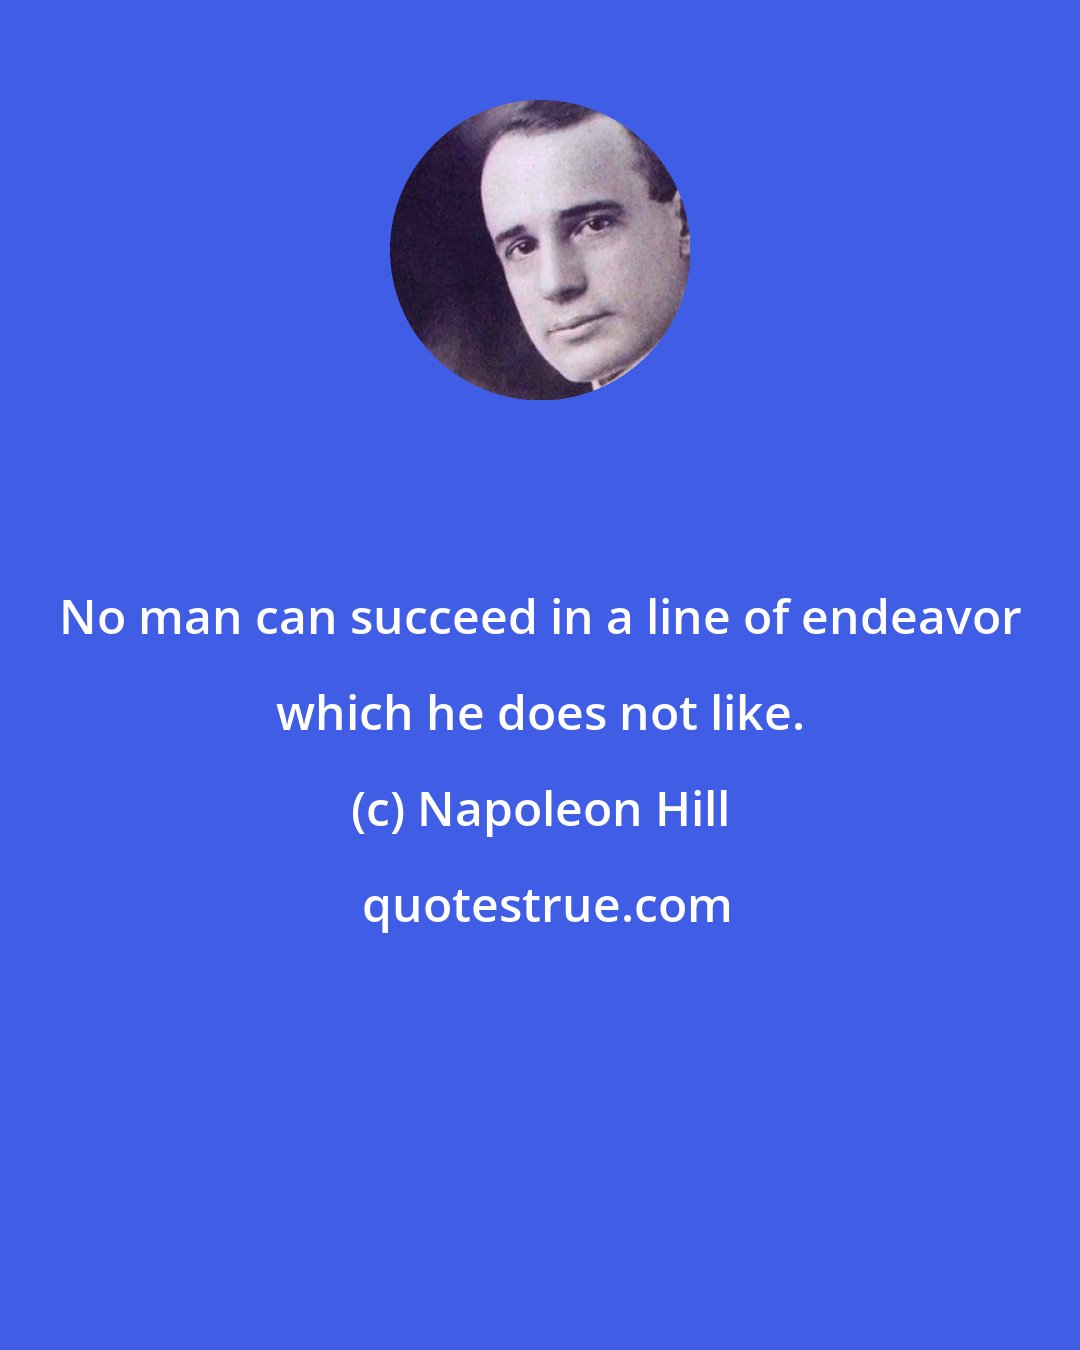 Napoleon Hill: No man can succeed in a line of endeavor which he does not like.